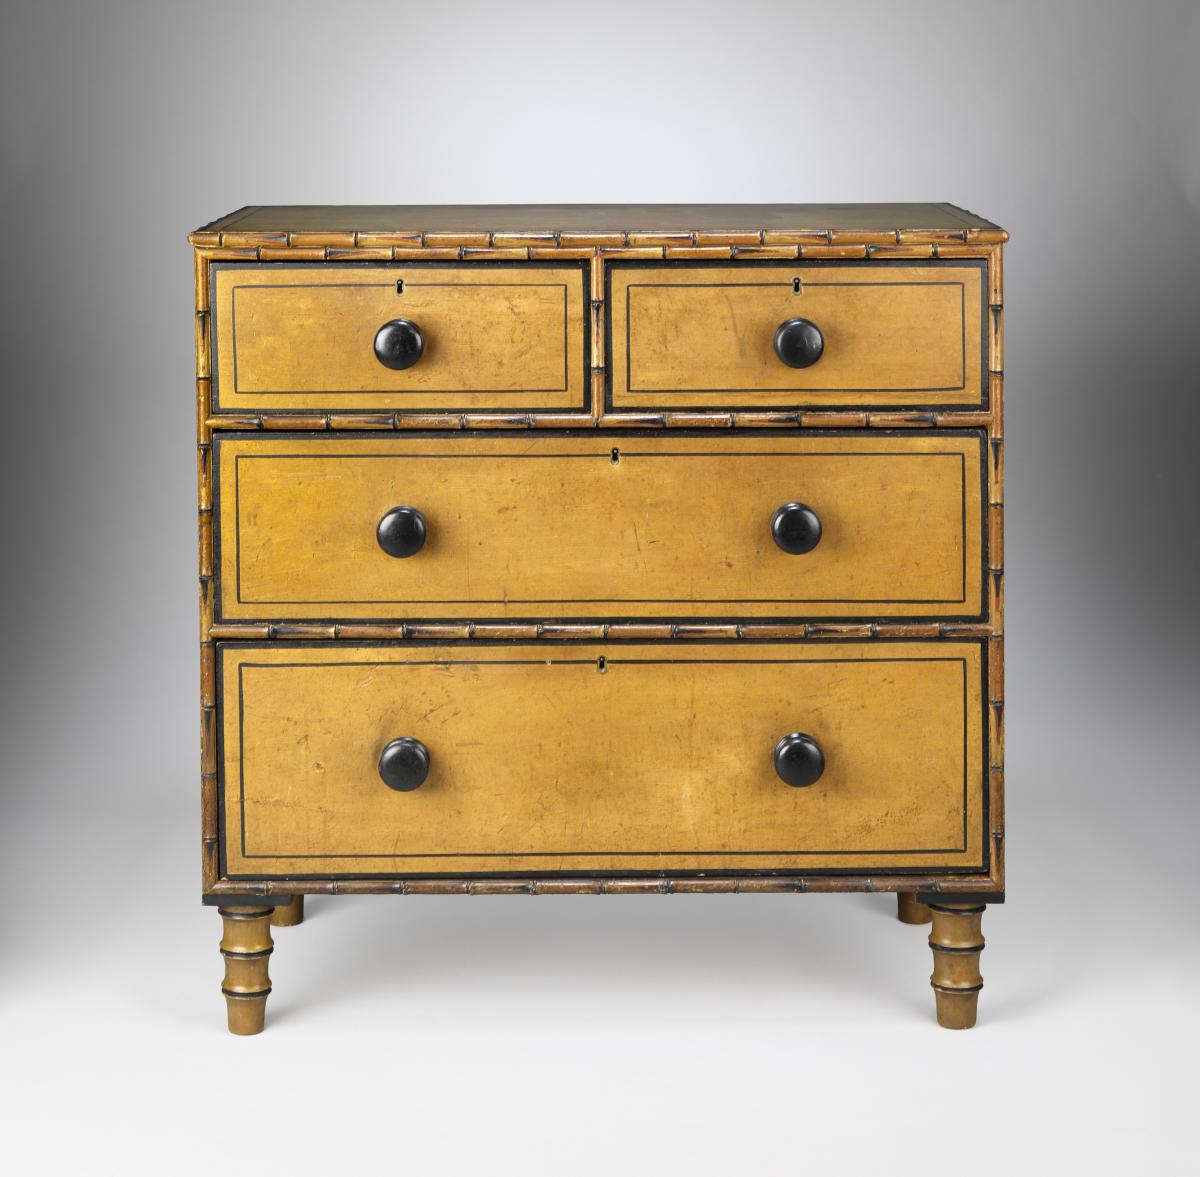  Regency Painted Chest of Drawers